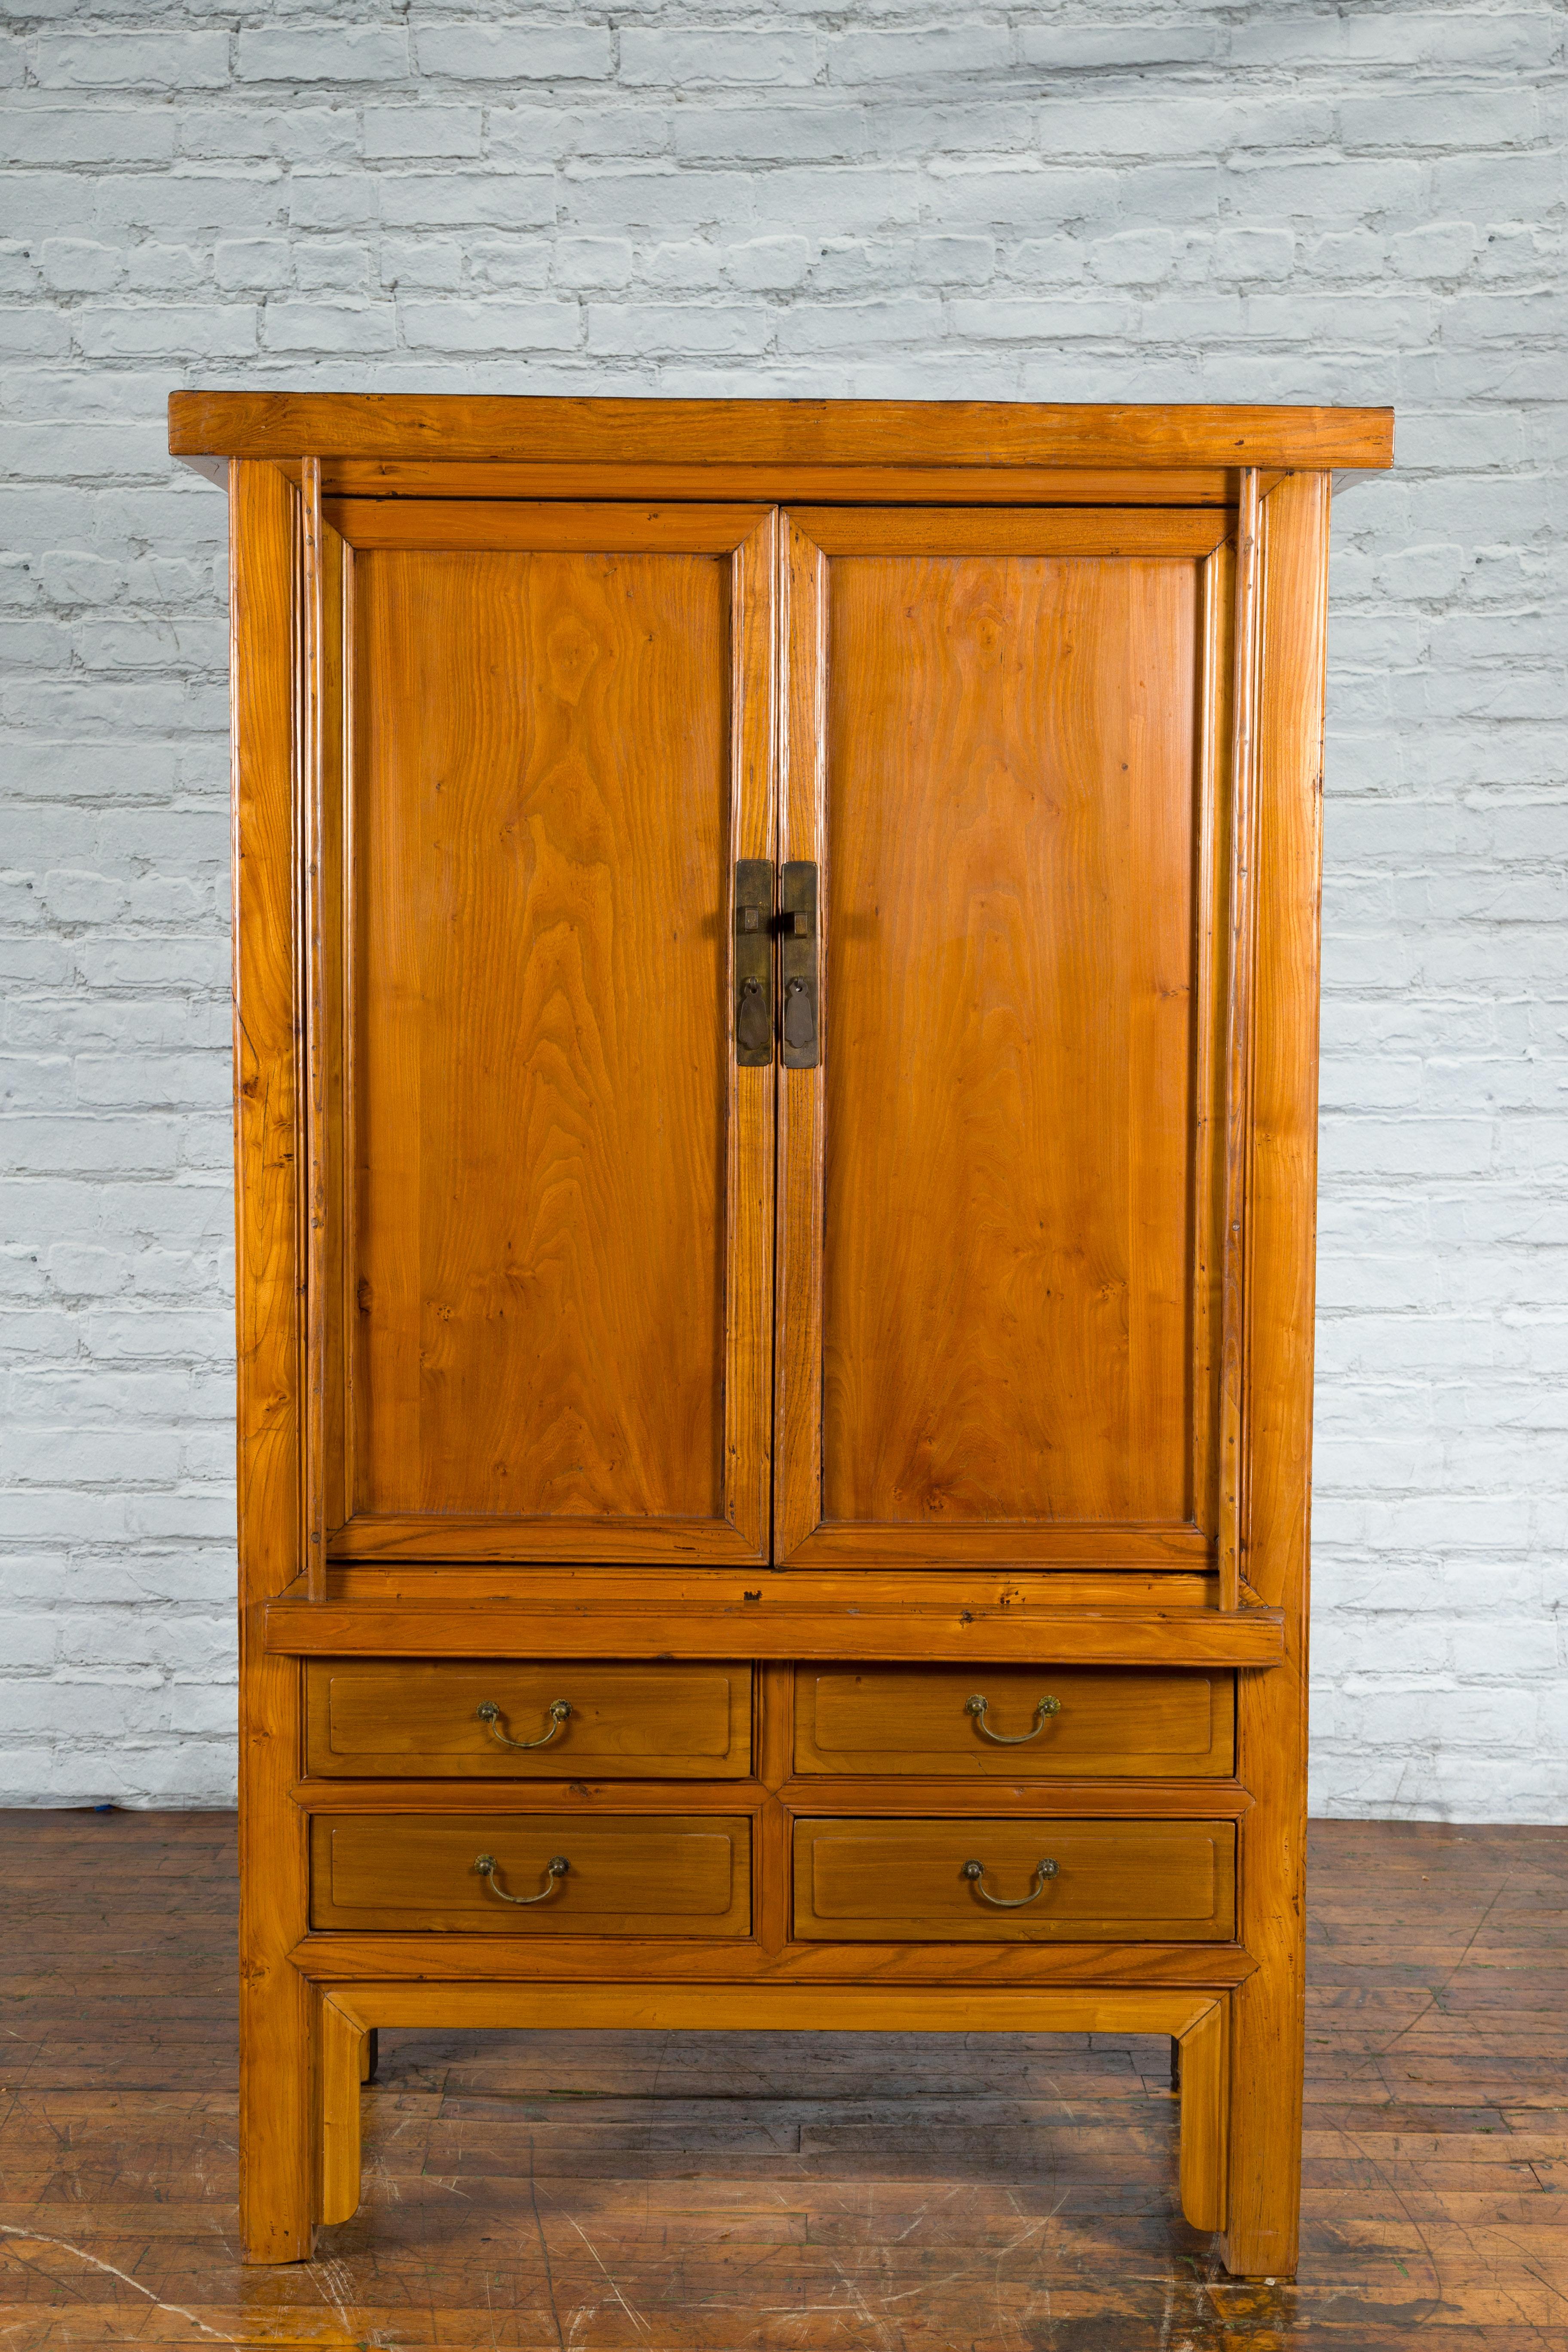 A Chinese Qing Dynasty period wooden cabinet from the 19th century with light lacquer, brass hardware, two doors and four drawers. Created in China during the Qing Dynasty in the 19th century, this wooden cabinet features a linear silhouette